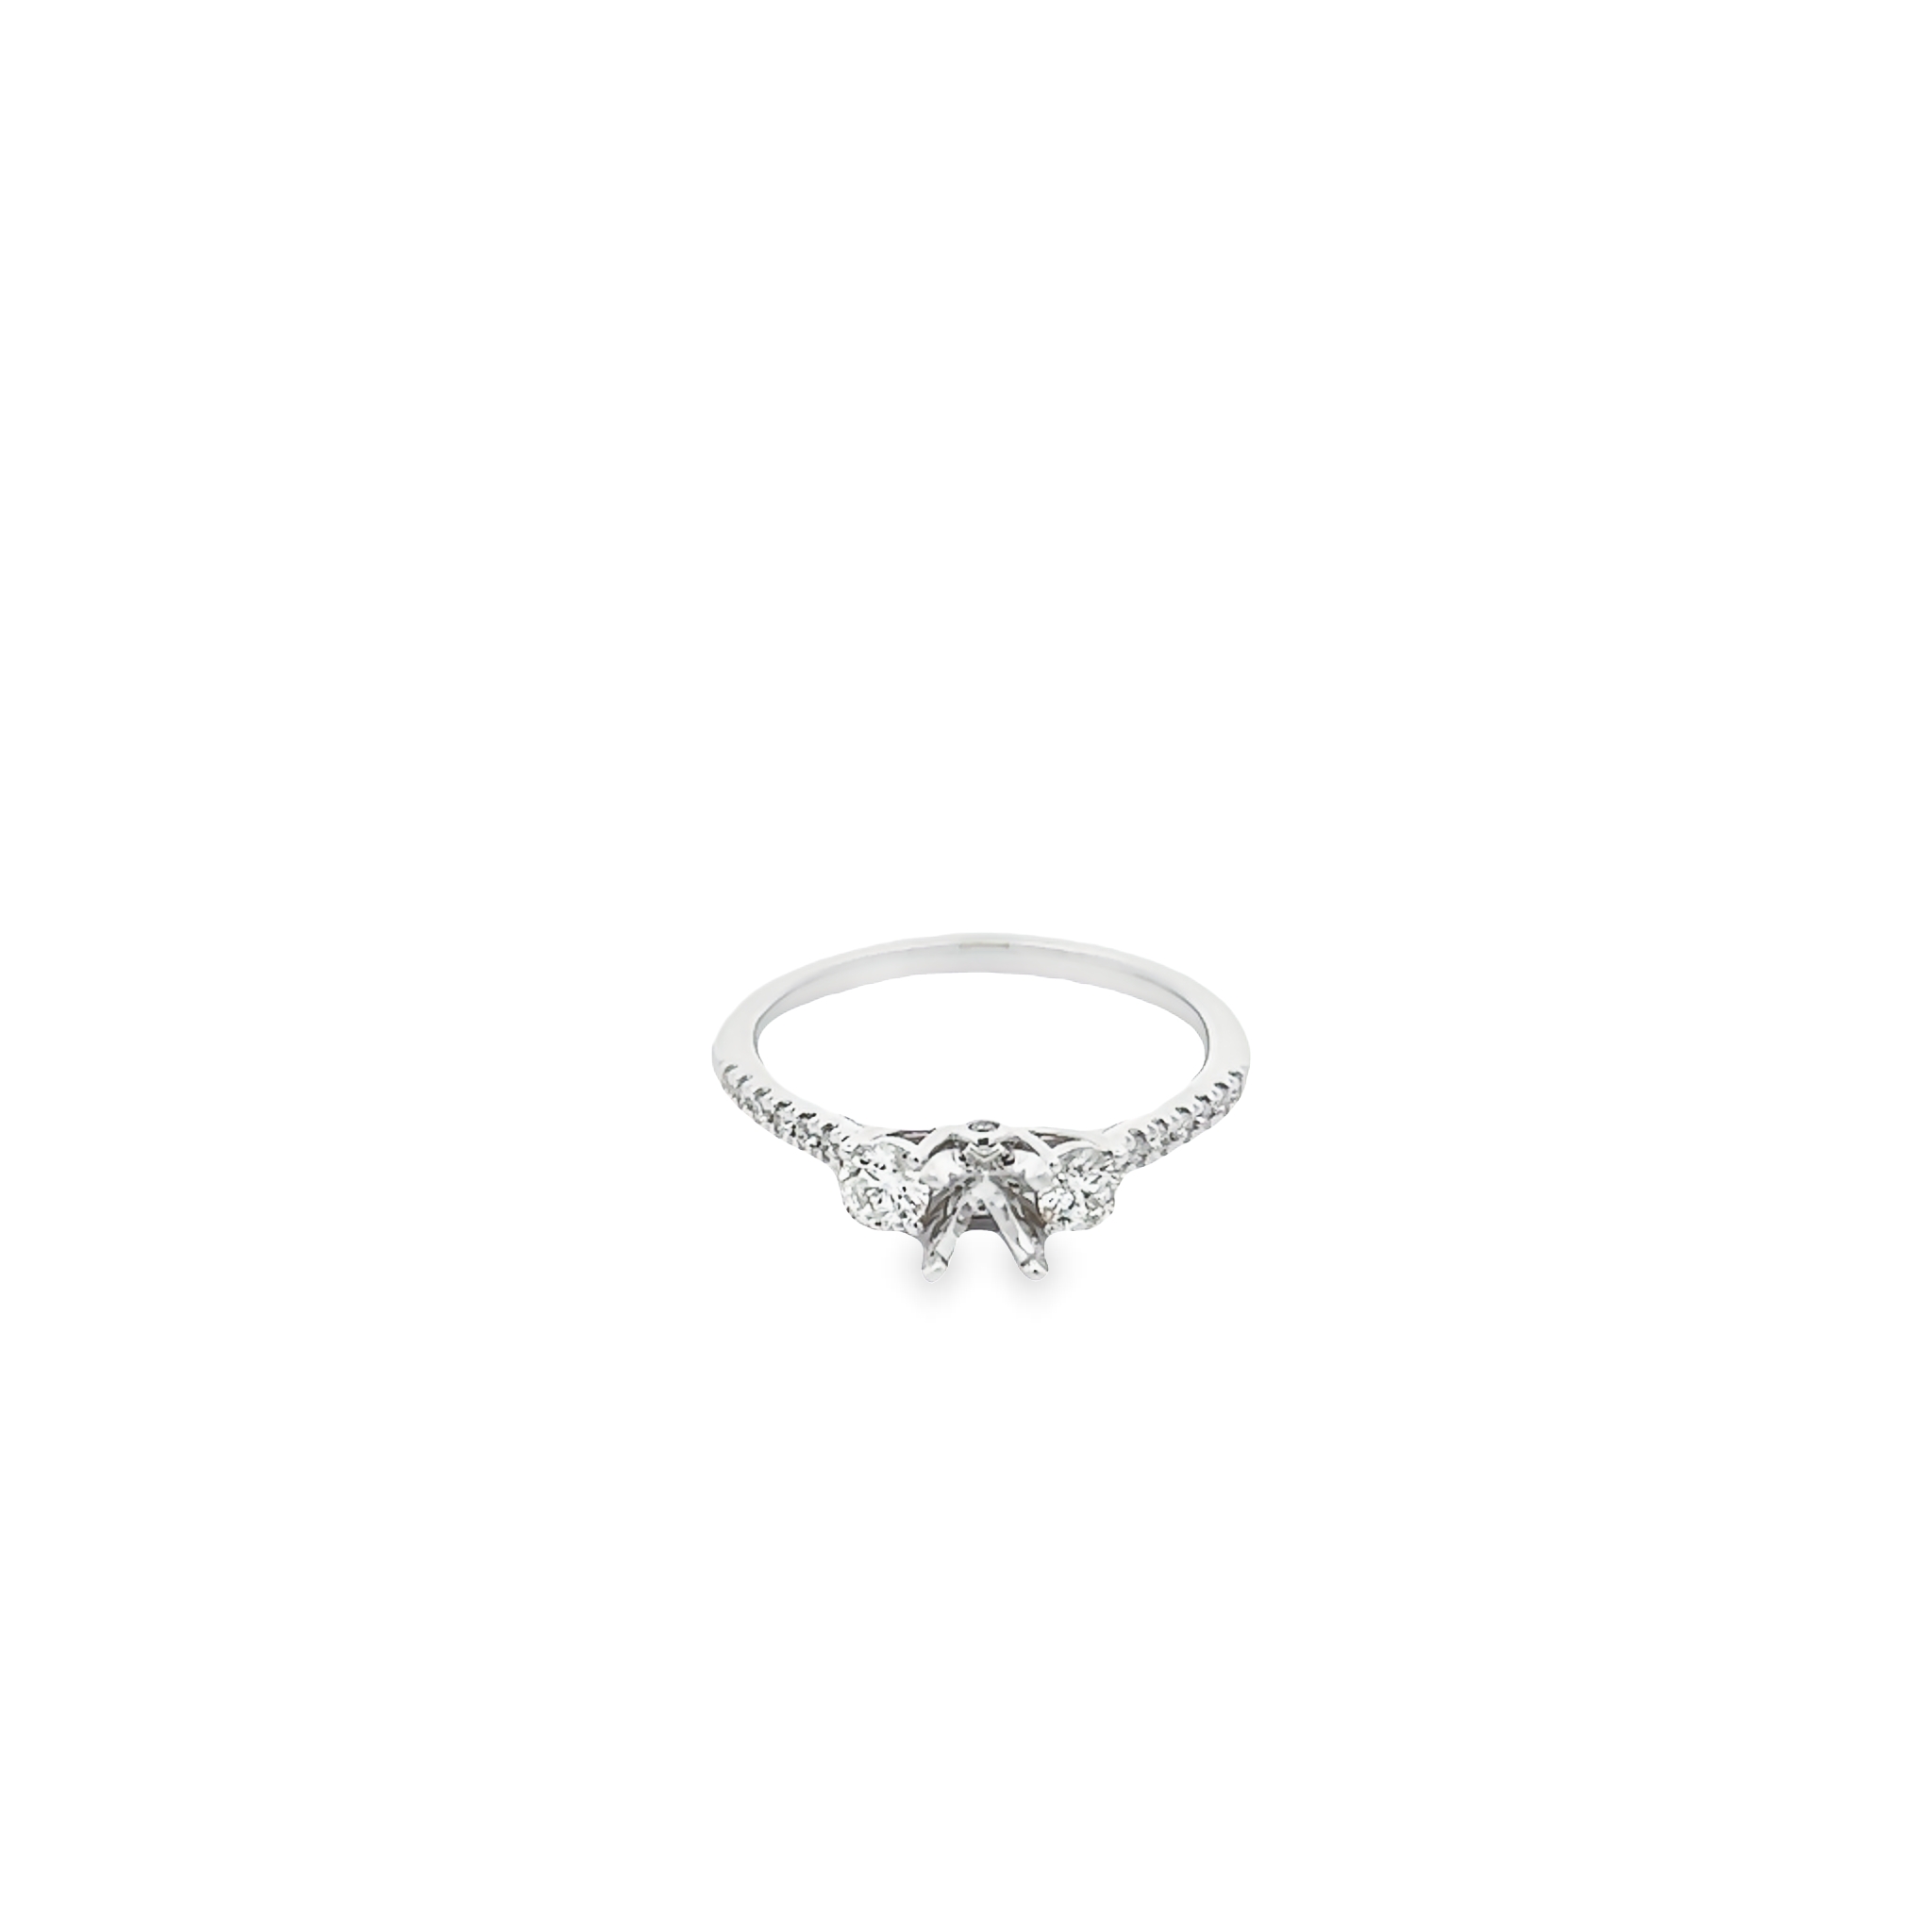 14 Karat White Gold Semi Mount Engagement Ring With 18=0.42 Total Weight Round Brilliant G Vs Diamonds. Size 7